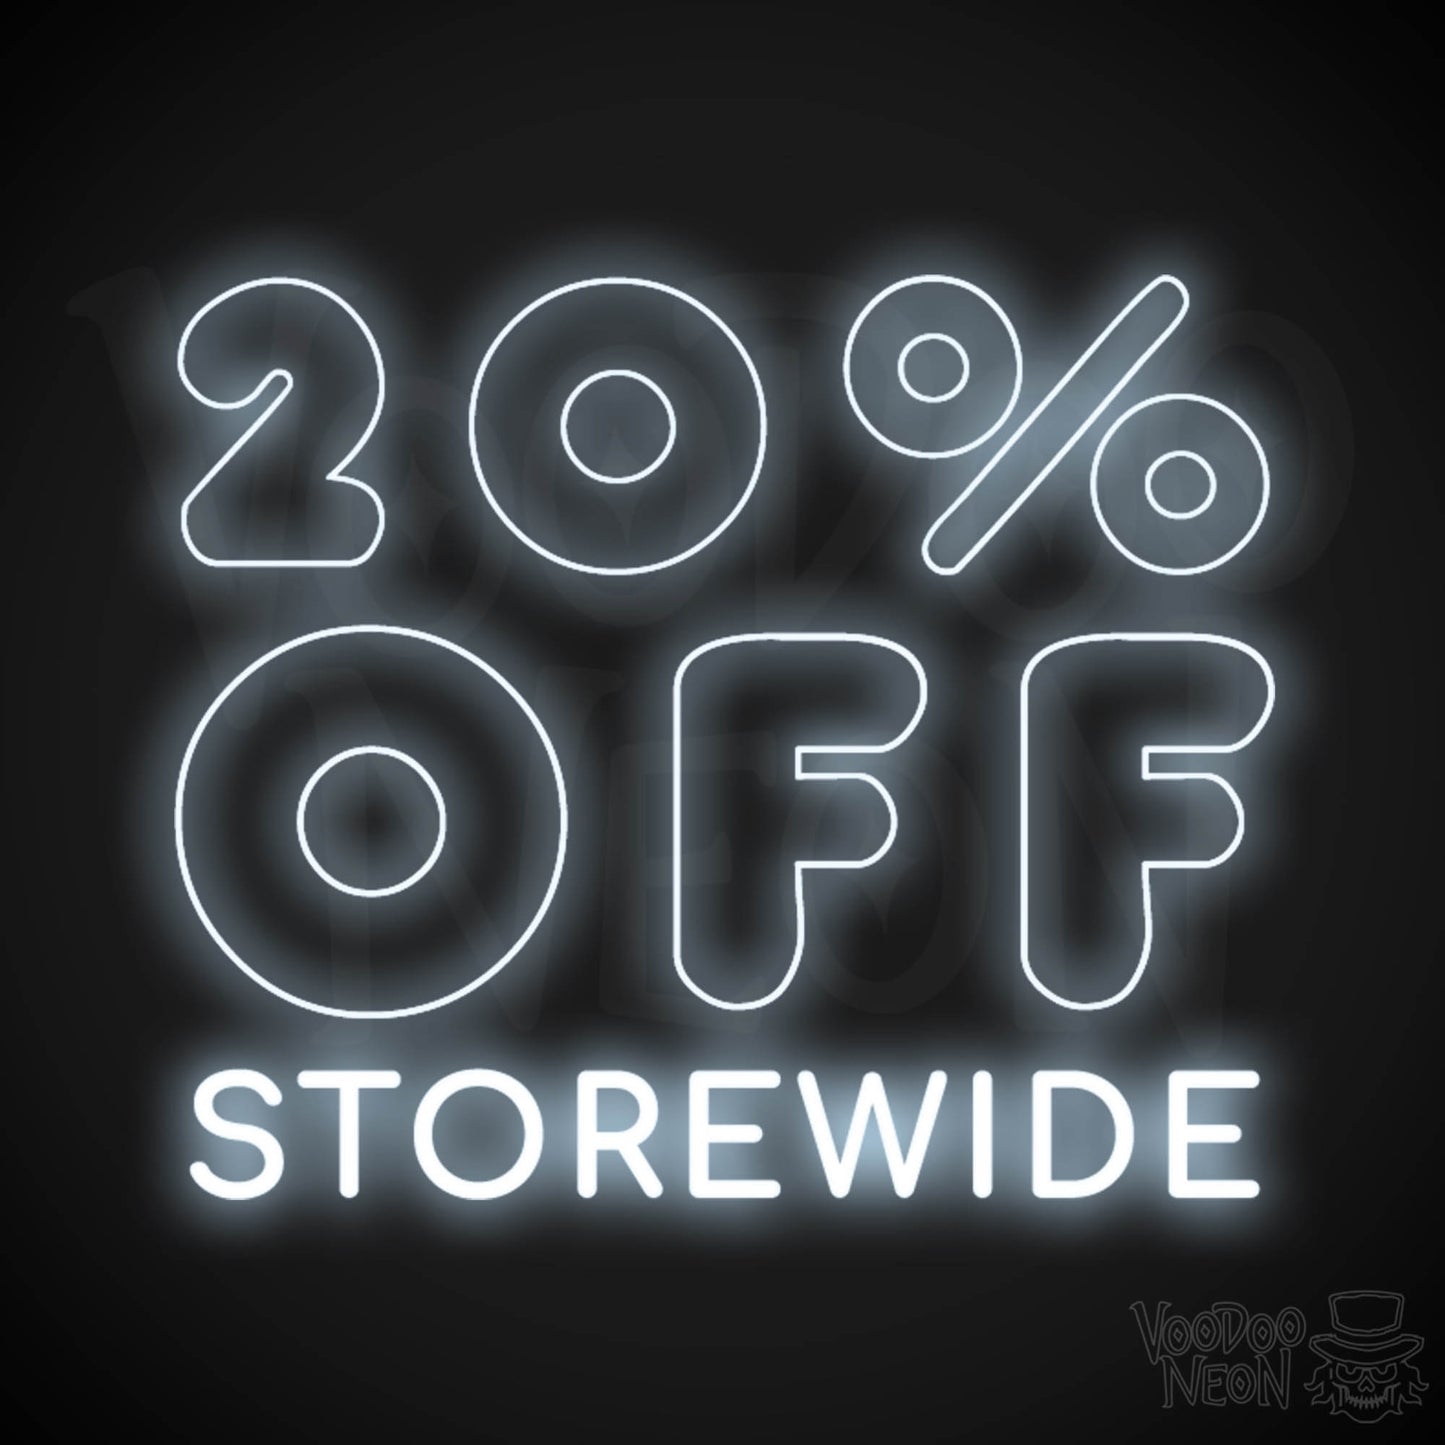 20% Off Storewide Neon Sign - 20% Off Storewide Sign - LED Shop Sign - Color Cool White